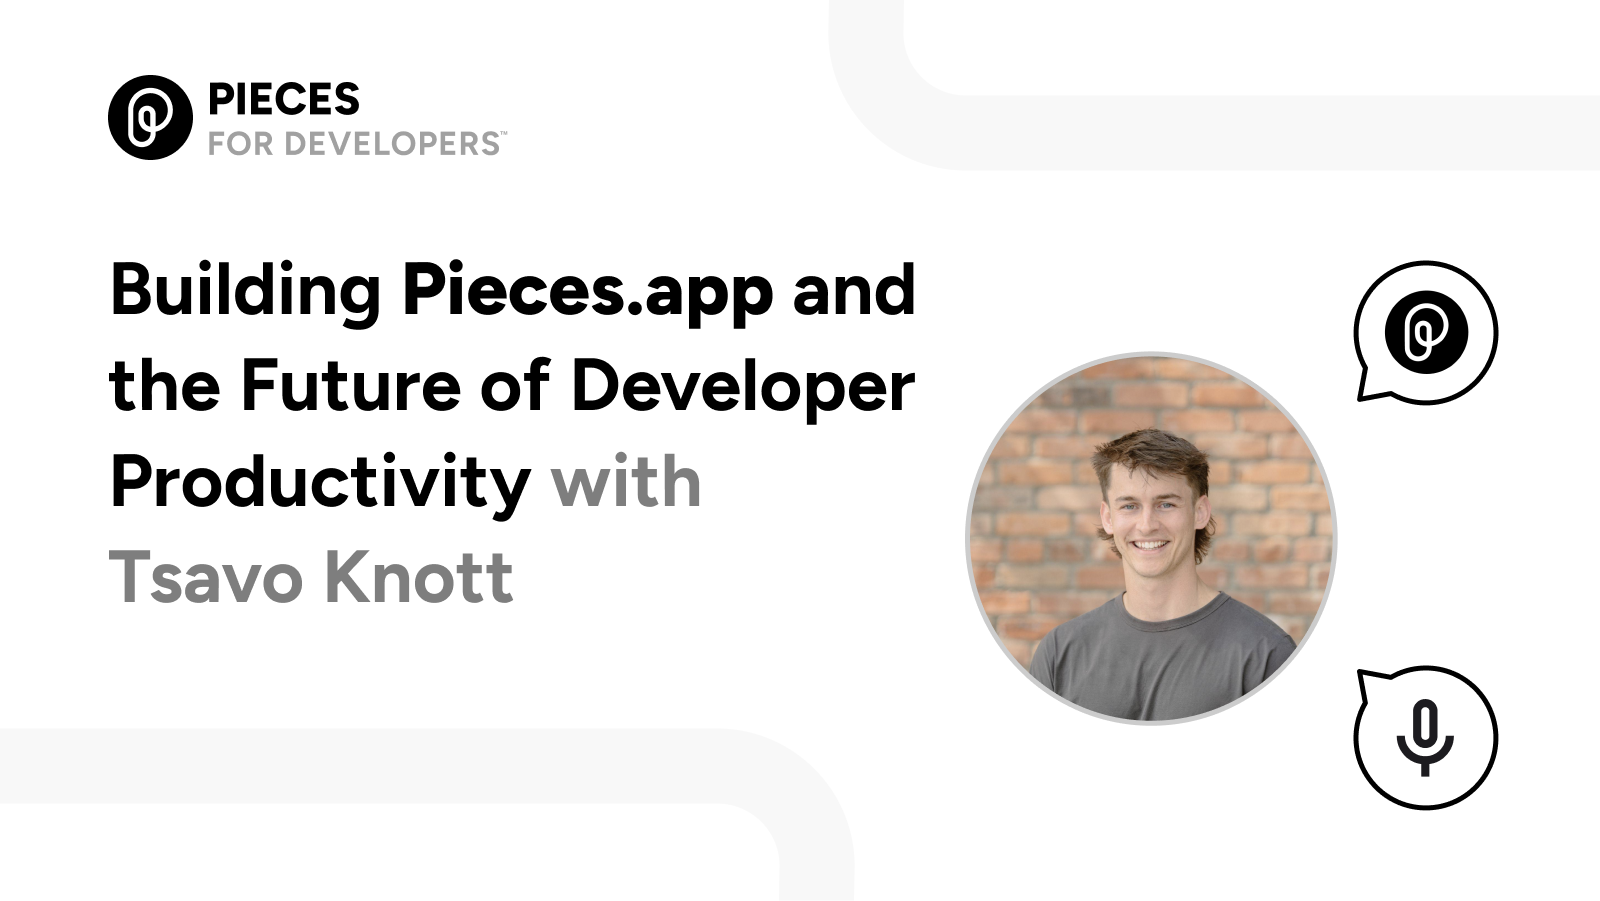 Building Pieces.app and the Future of Developer Productivity